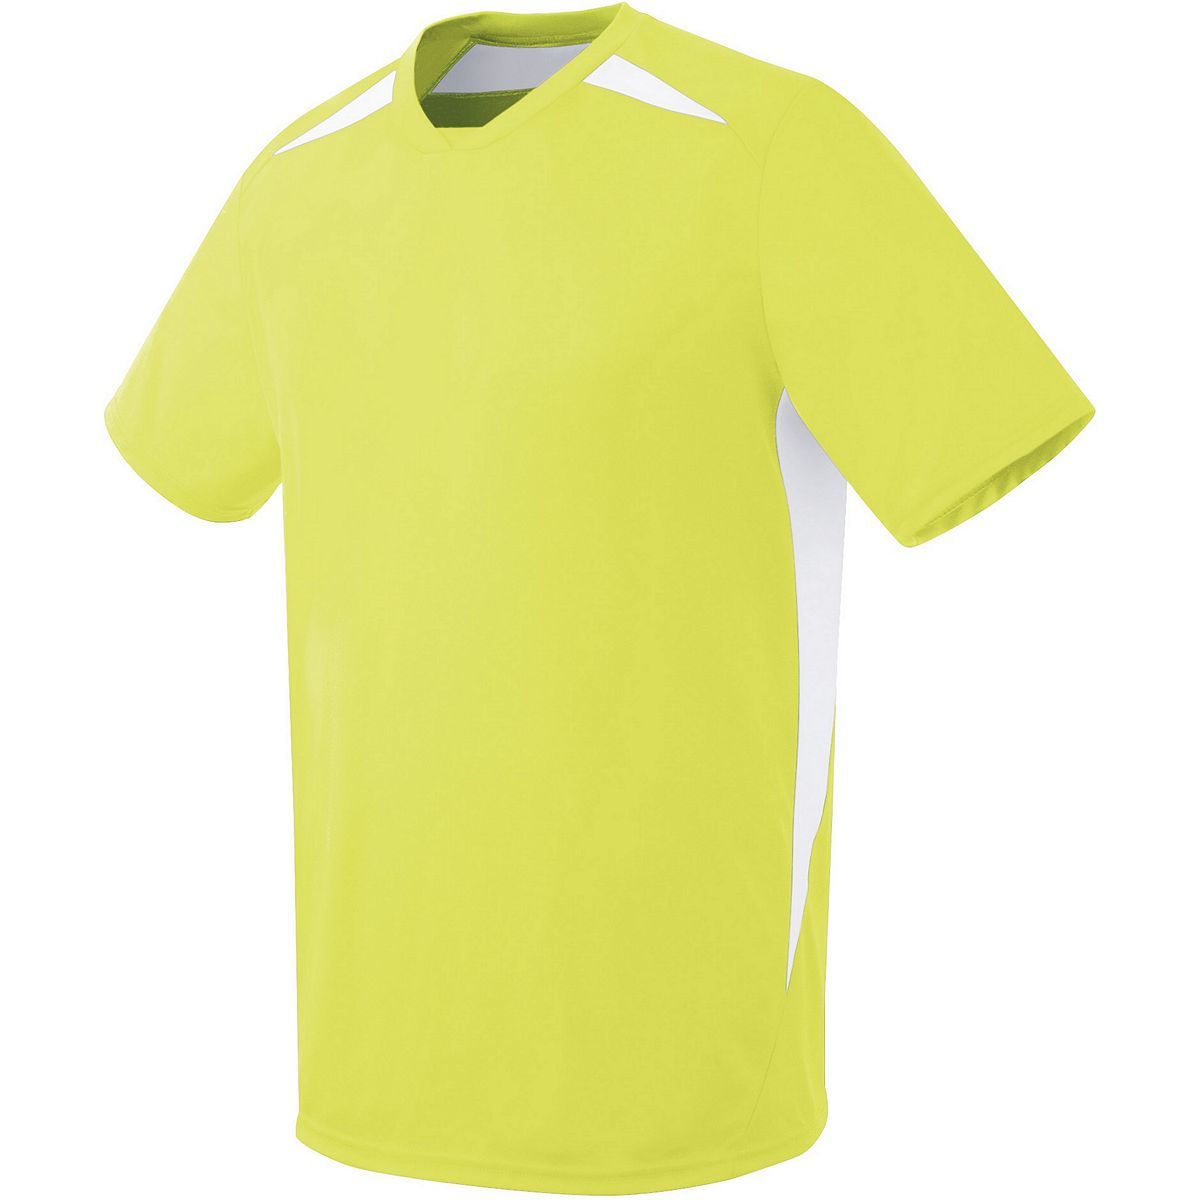 High 5 Adult Hawk Jersey in Lime/White  -Part of the Adult, Adult-Jersey, High5-Products, Soccer, Shirts, All-Sports-1 product lines at KanaleyCreations.com